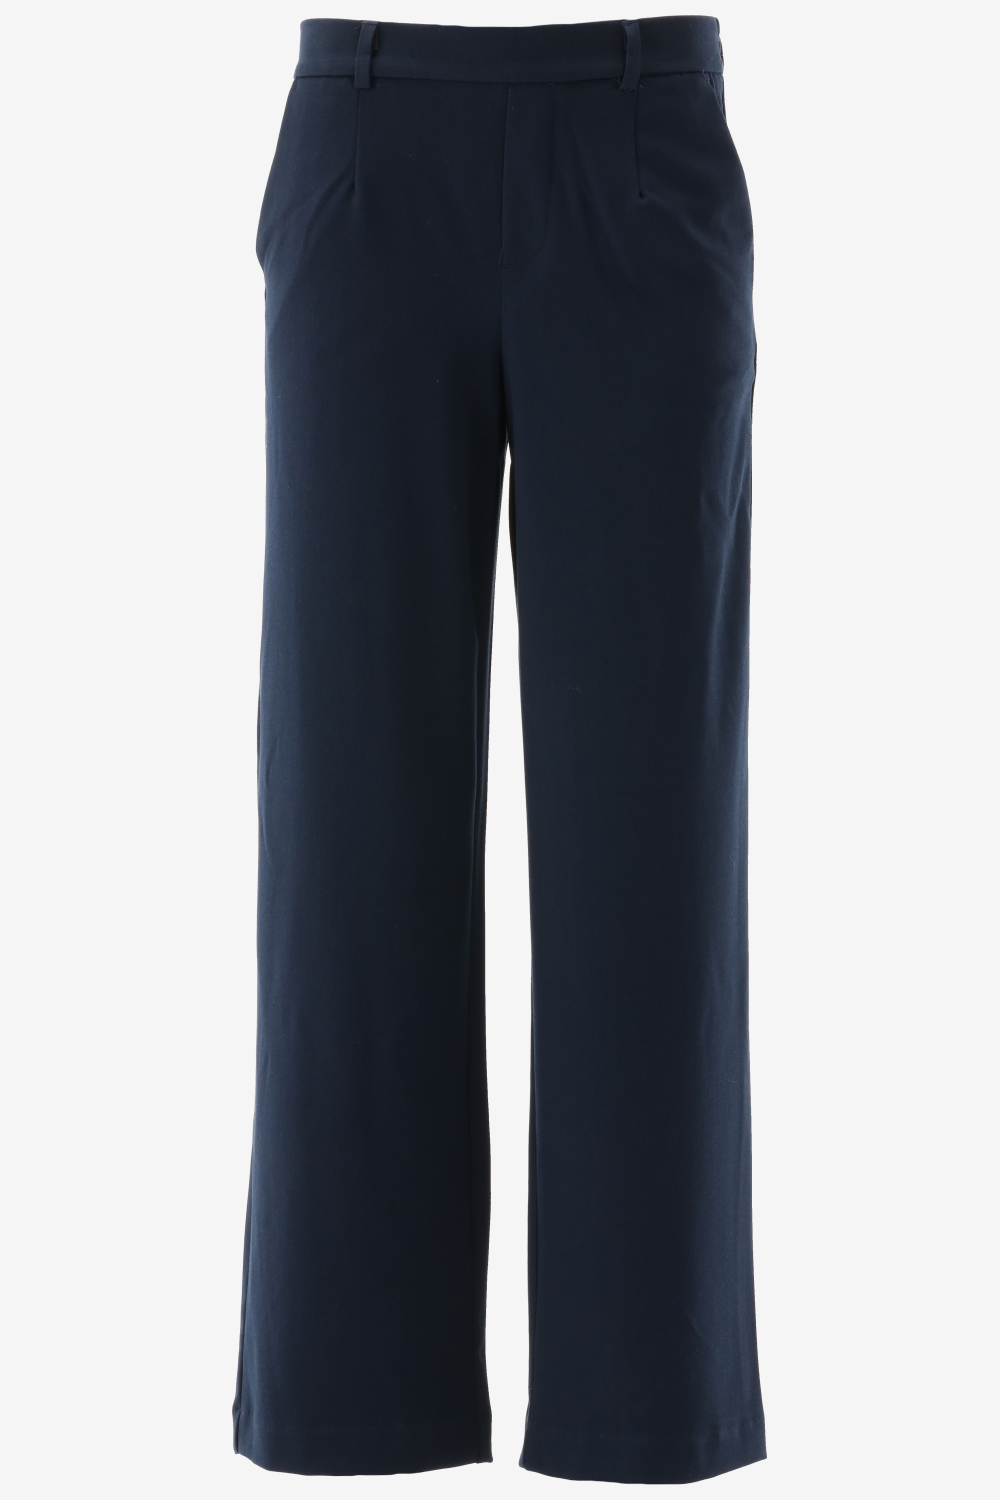 OBJECT COLLECTORS ITEM OBJLISA WIDE PANT NOOS Dames Trousers - Maat 42